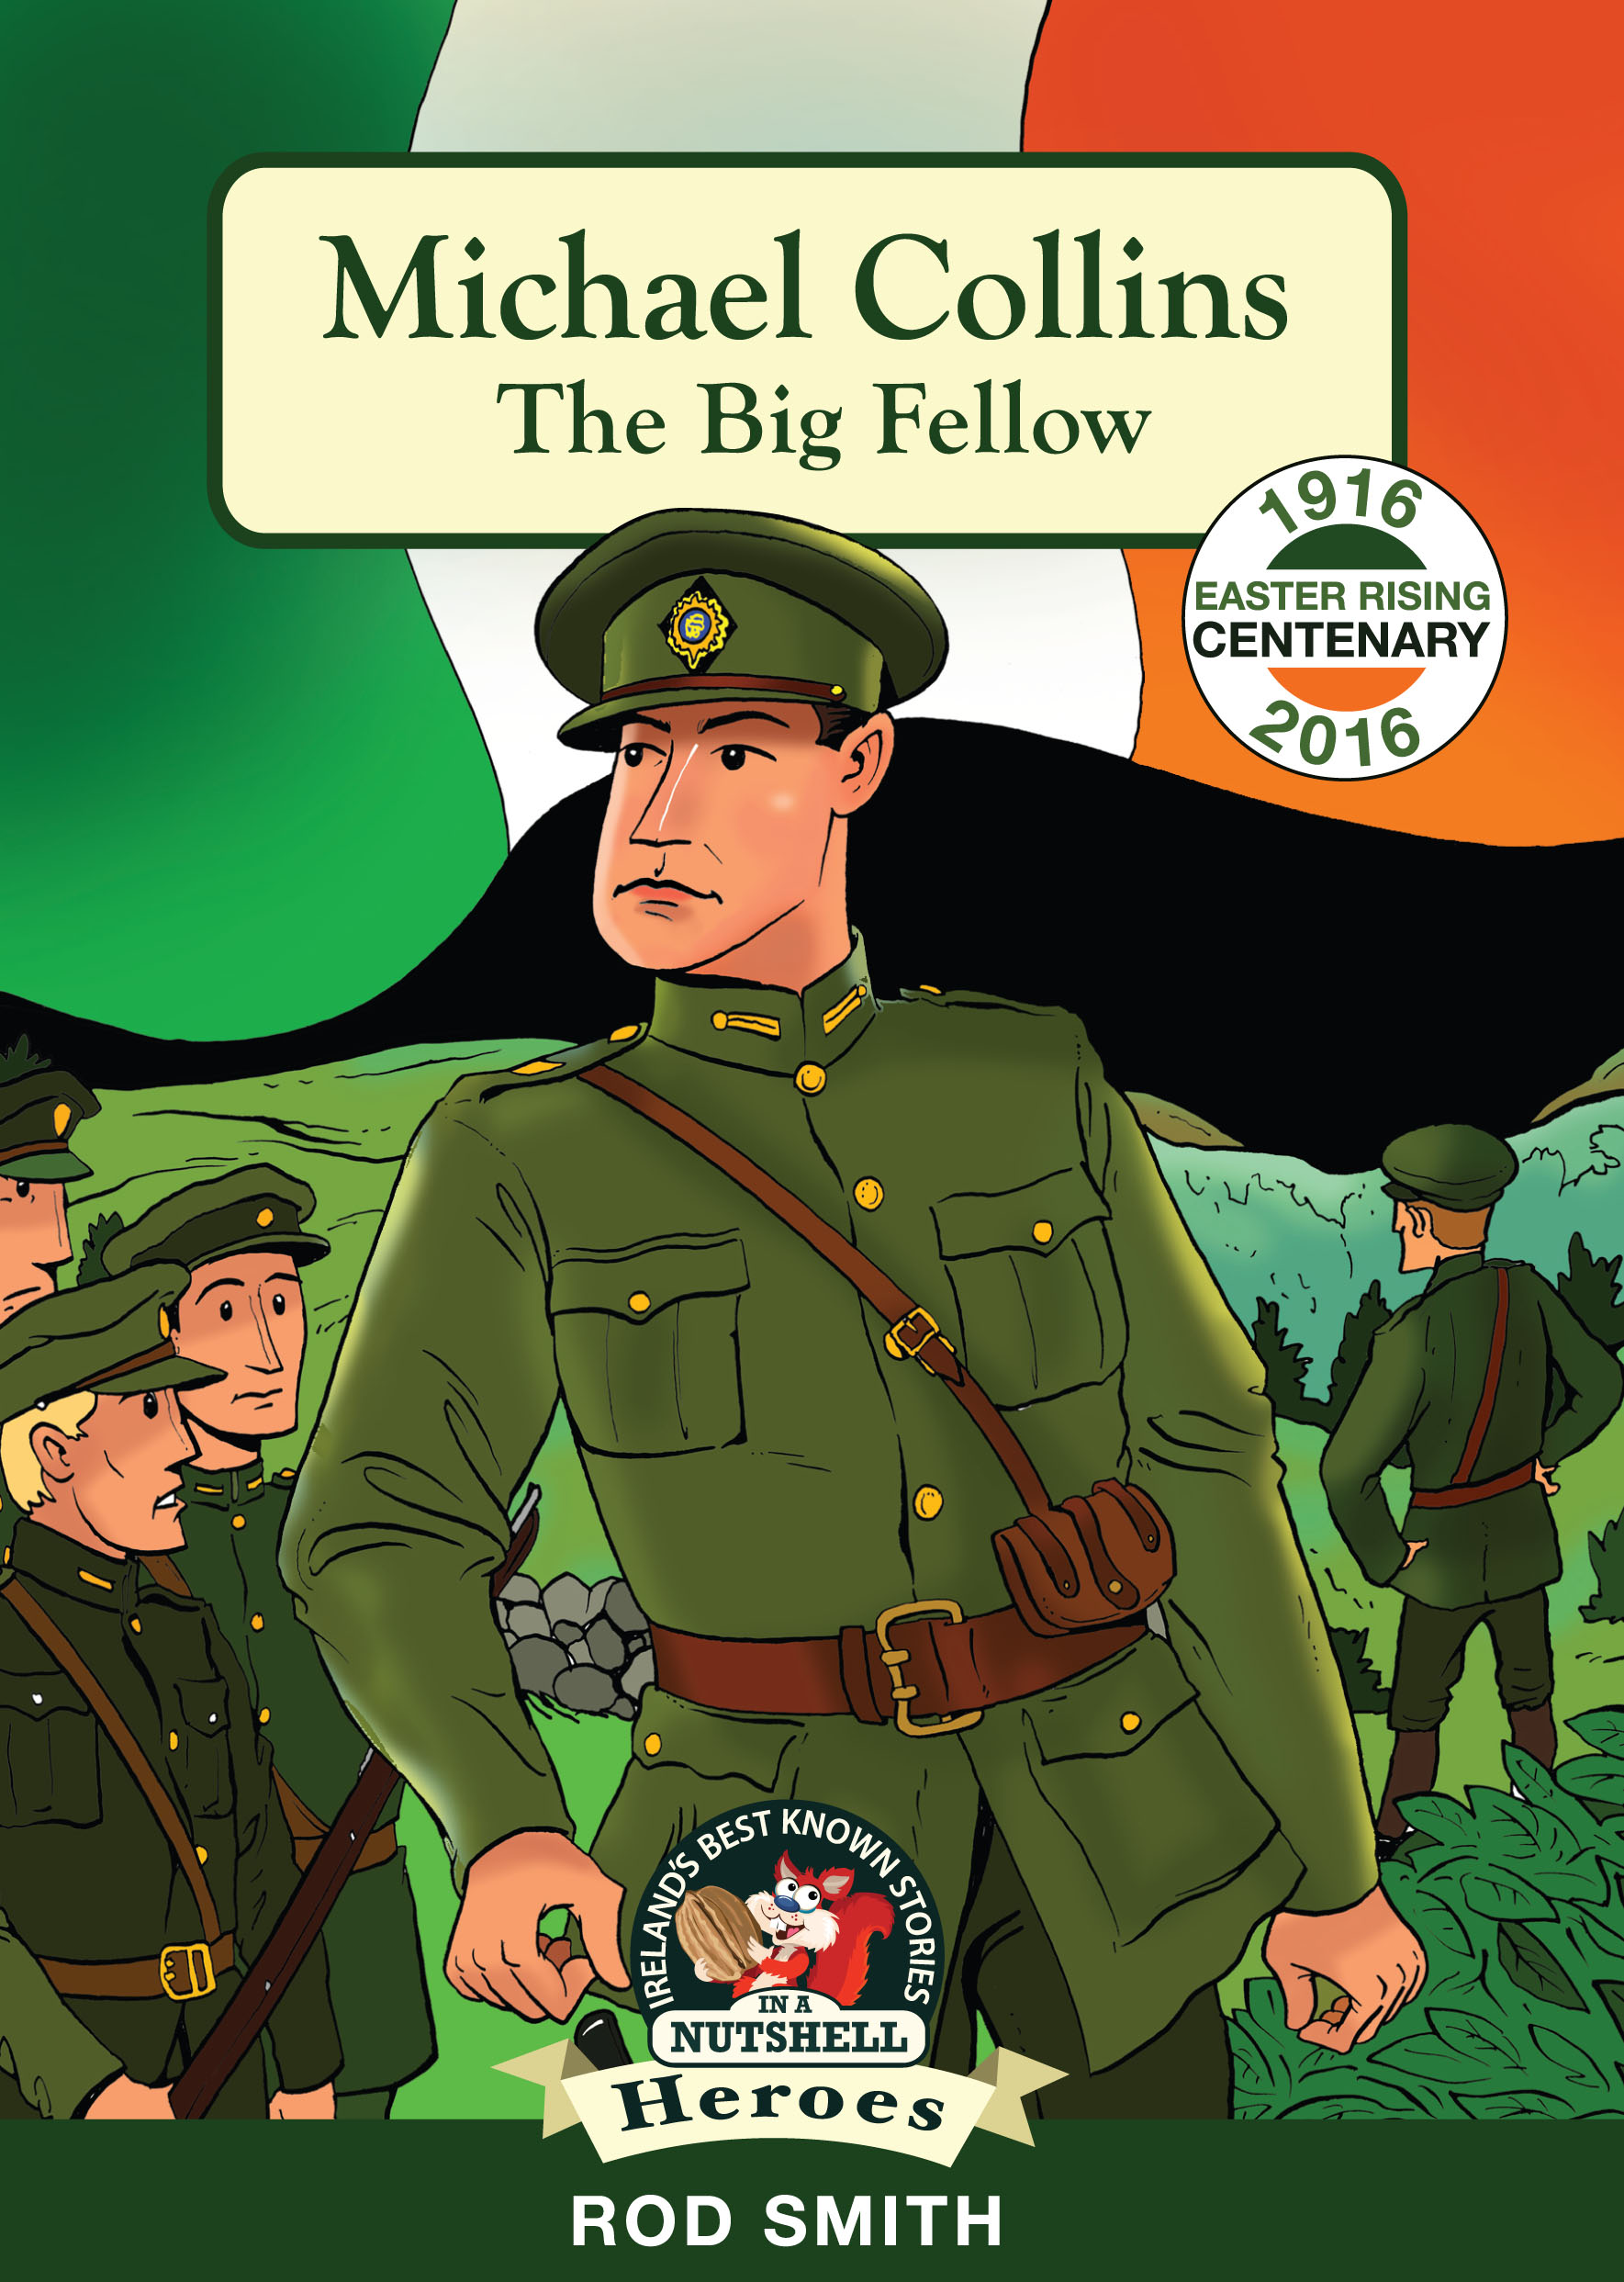 Michael Collins: The Big Fellow  (In a Nutshell Series)